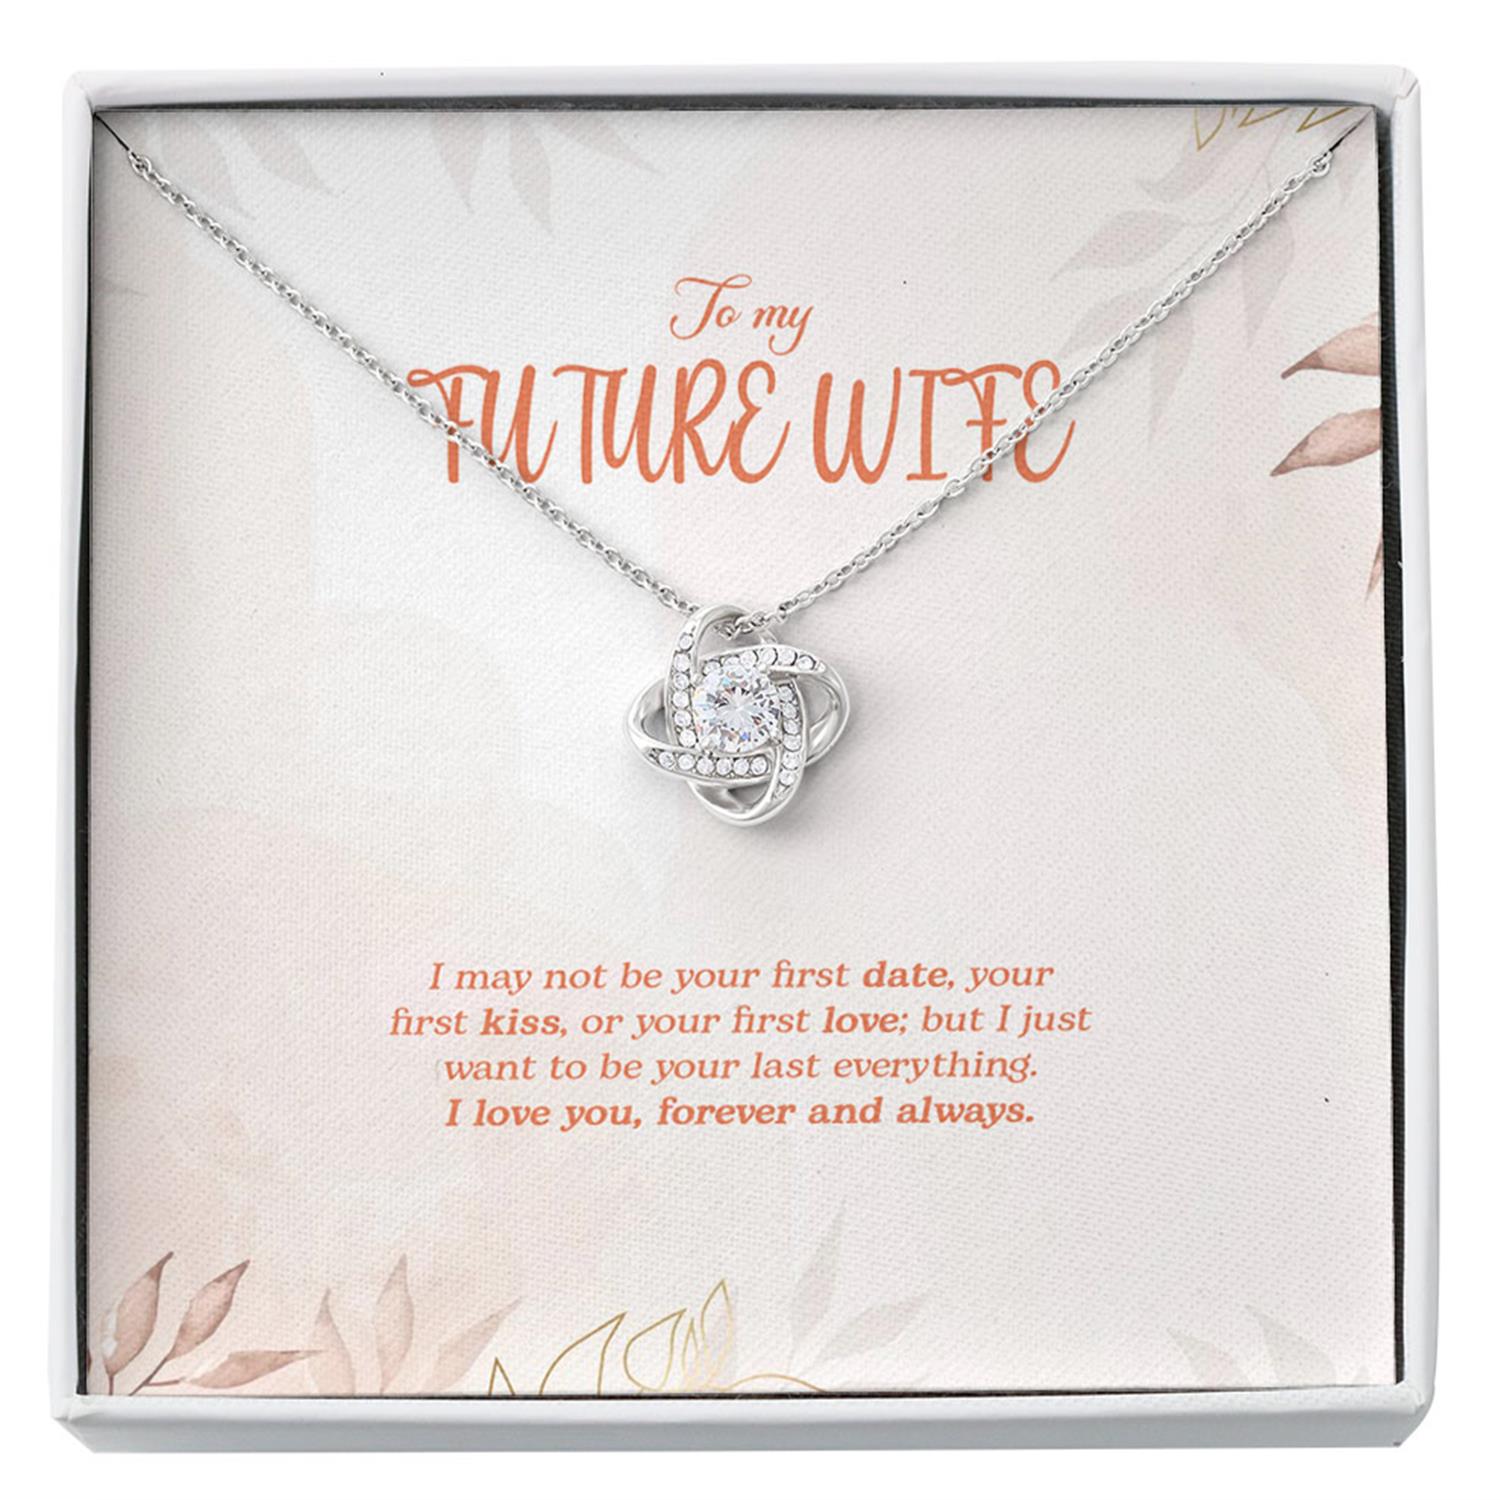 Wife Necklace, To My Future Wife Necklace, Engagement, Sentimental Gift For Bride From Groom Custom Necklace